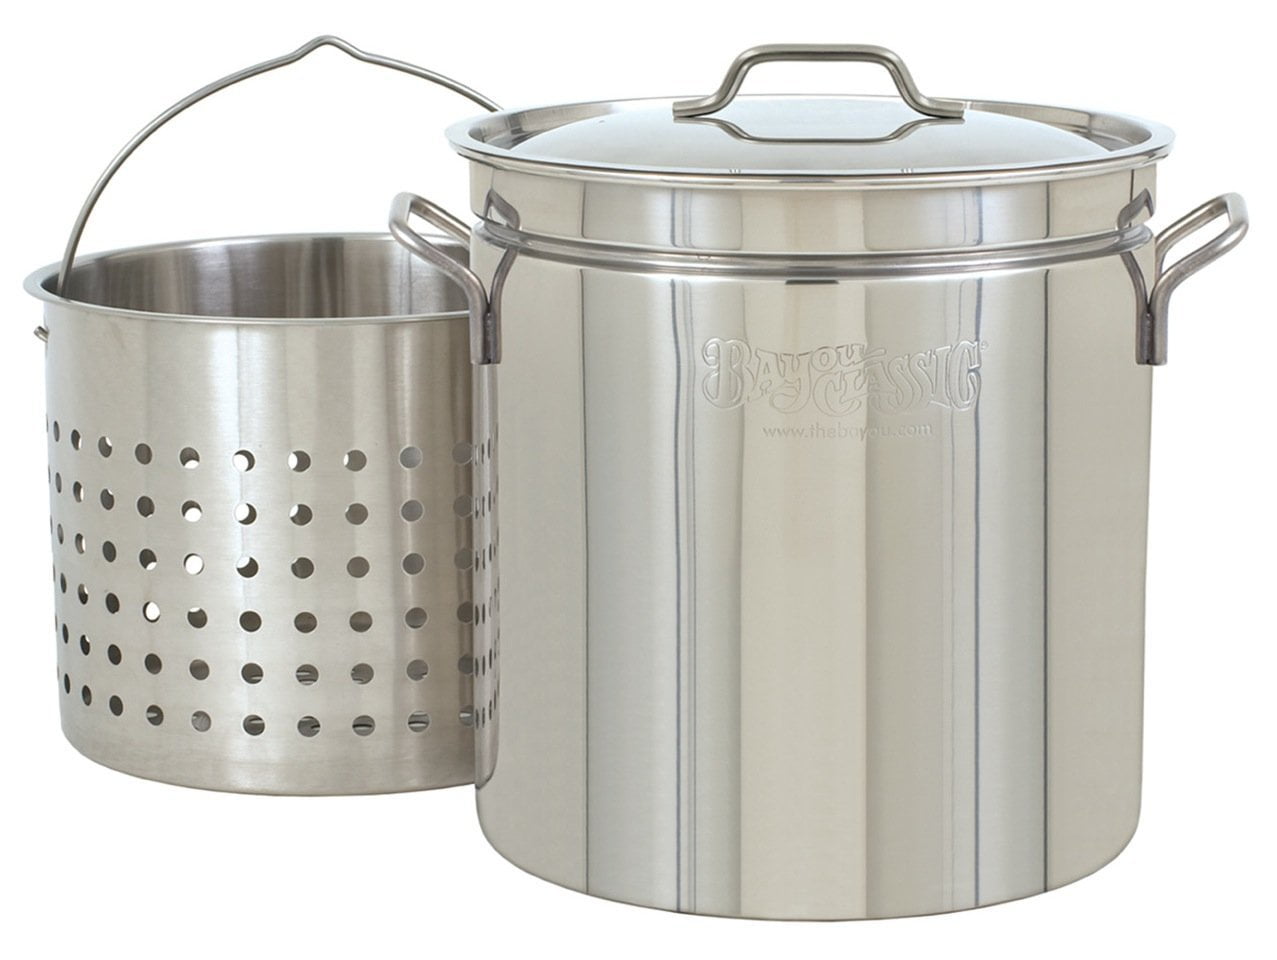 Bayou Classic 1124 24-Quart All Purpose Stainless Steel Stockpot with Steam and Boil Basket 